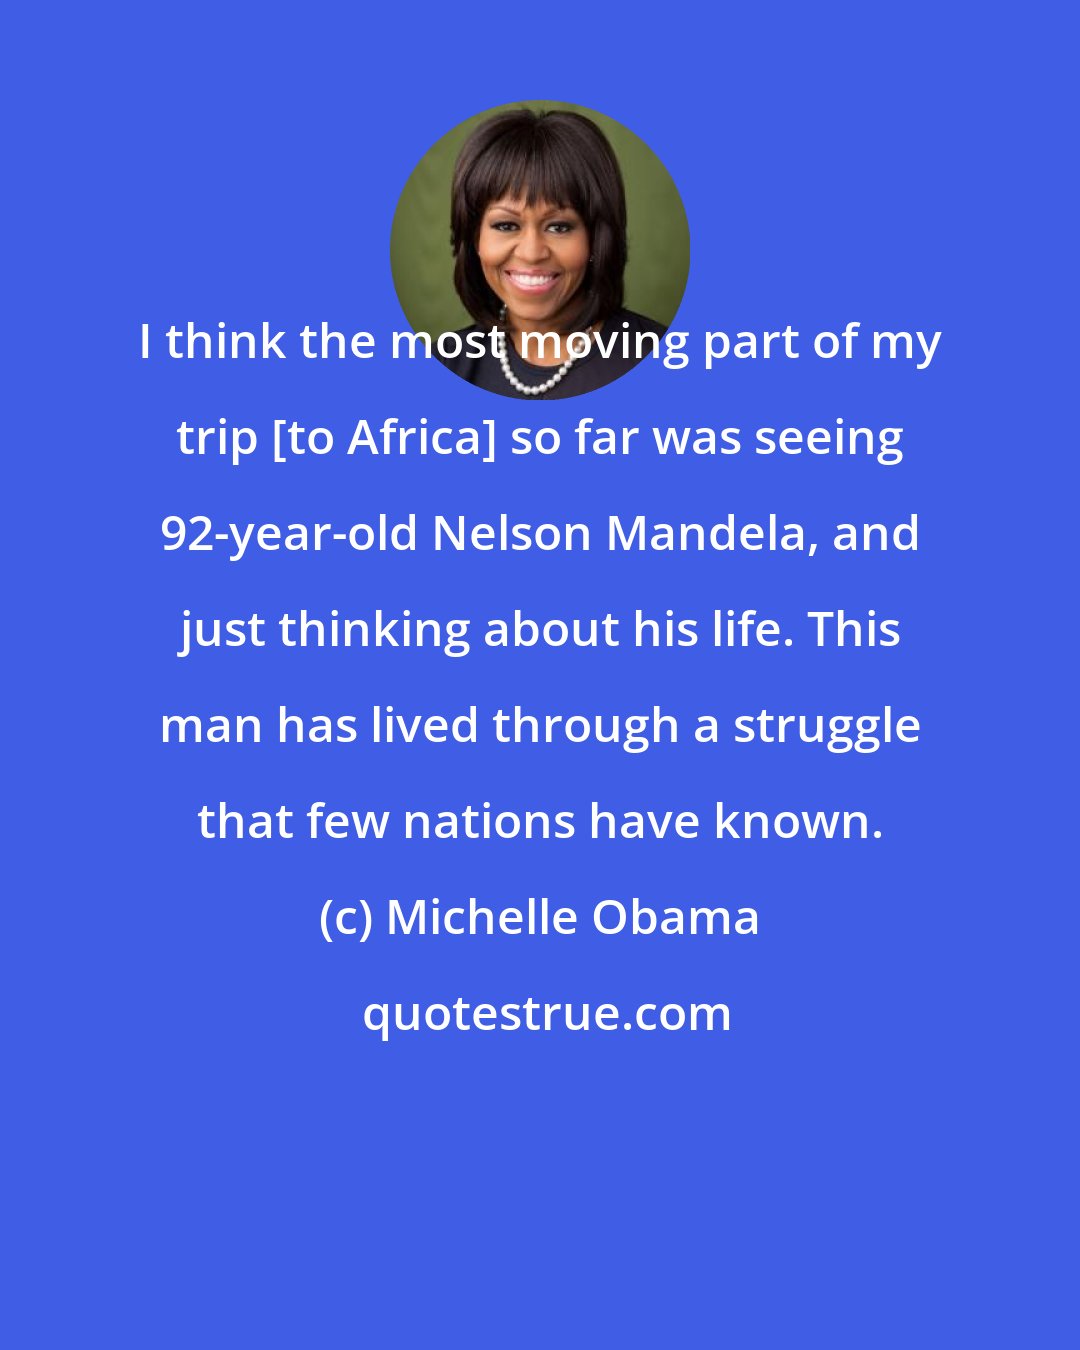 Michelle Obama: I think the most moving part of my trip [to Africa] so far was seeing 92-year-old Nelson Mandela, and just thinking about his life. This man has lived through a struggle that few nations have known.